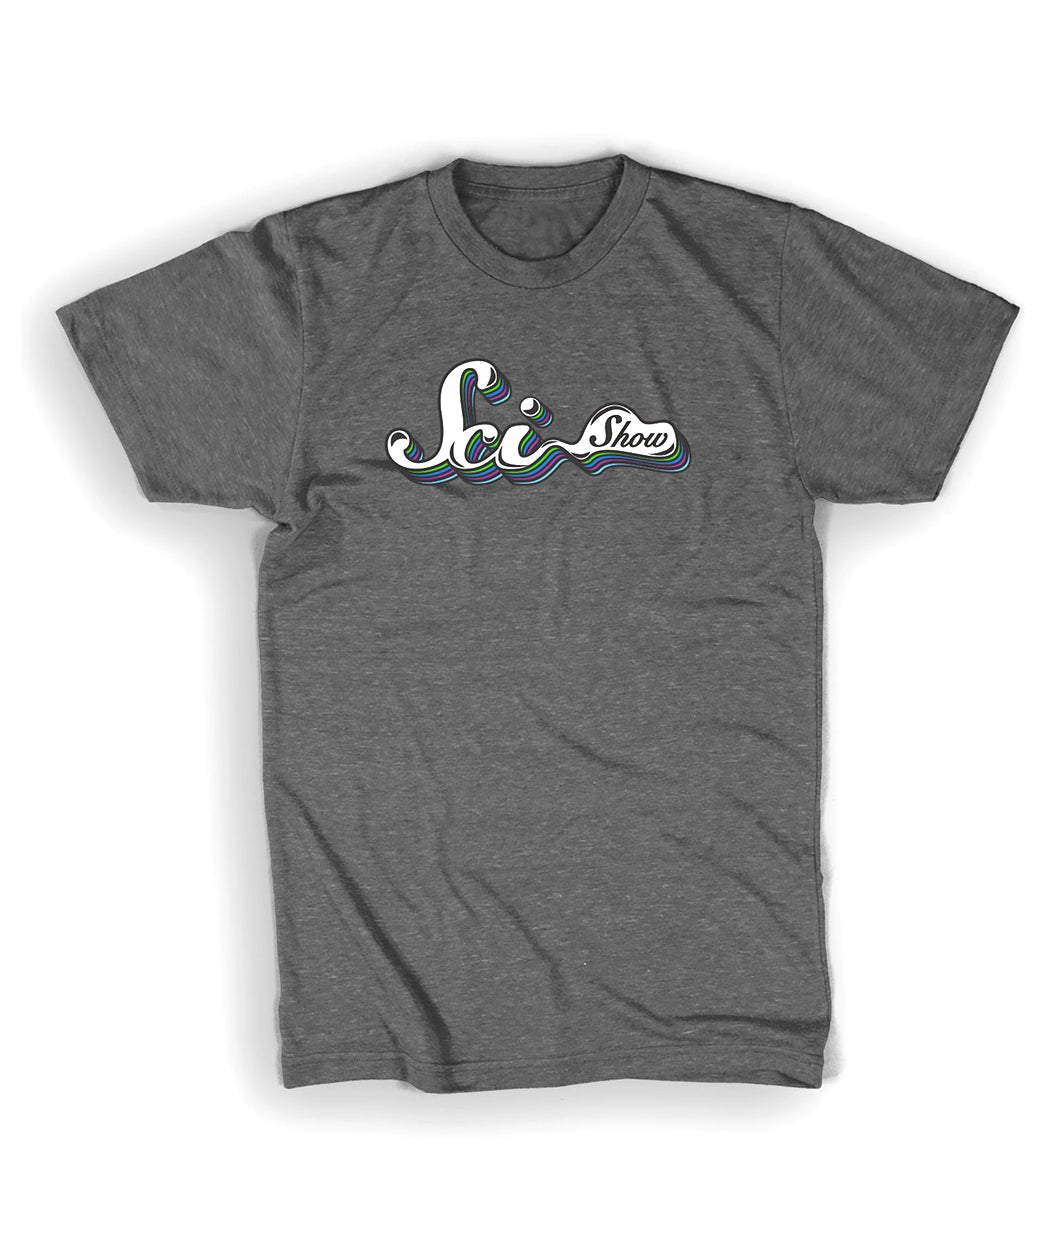 Gray shirt with “SciShow” logo. “Sci” is in white cursive font with a bubble attached surrounding “Show” in black cursive font. A green, purple, and blue drop shadow is behind logo - from SciShow